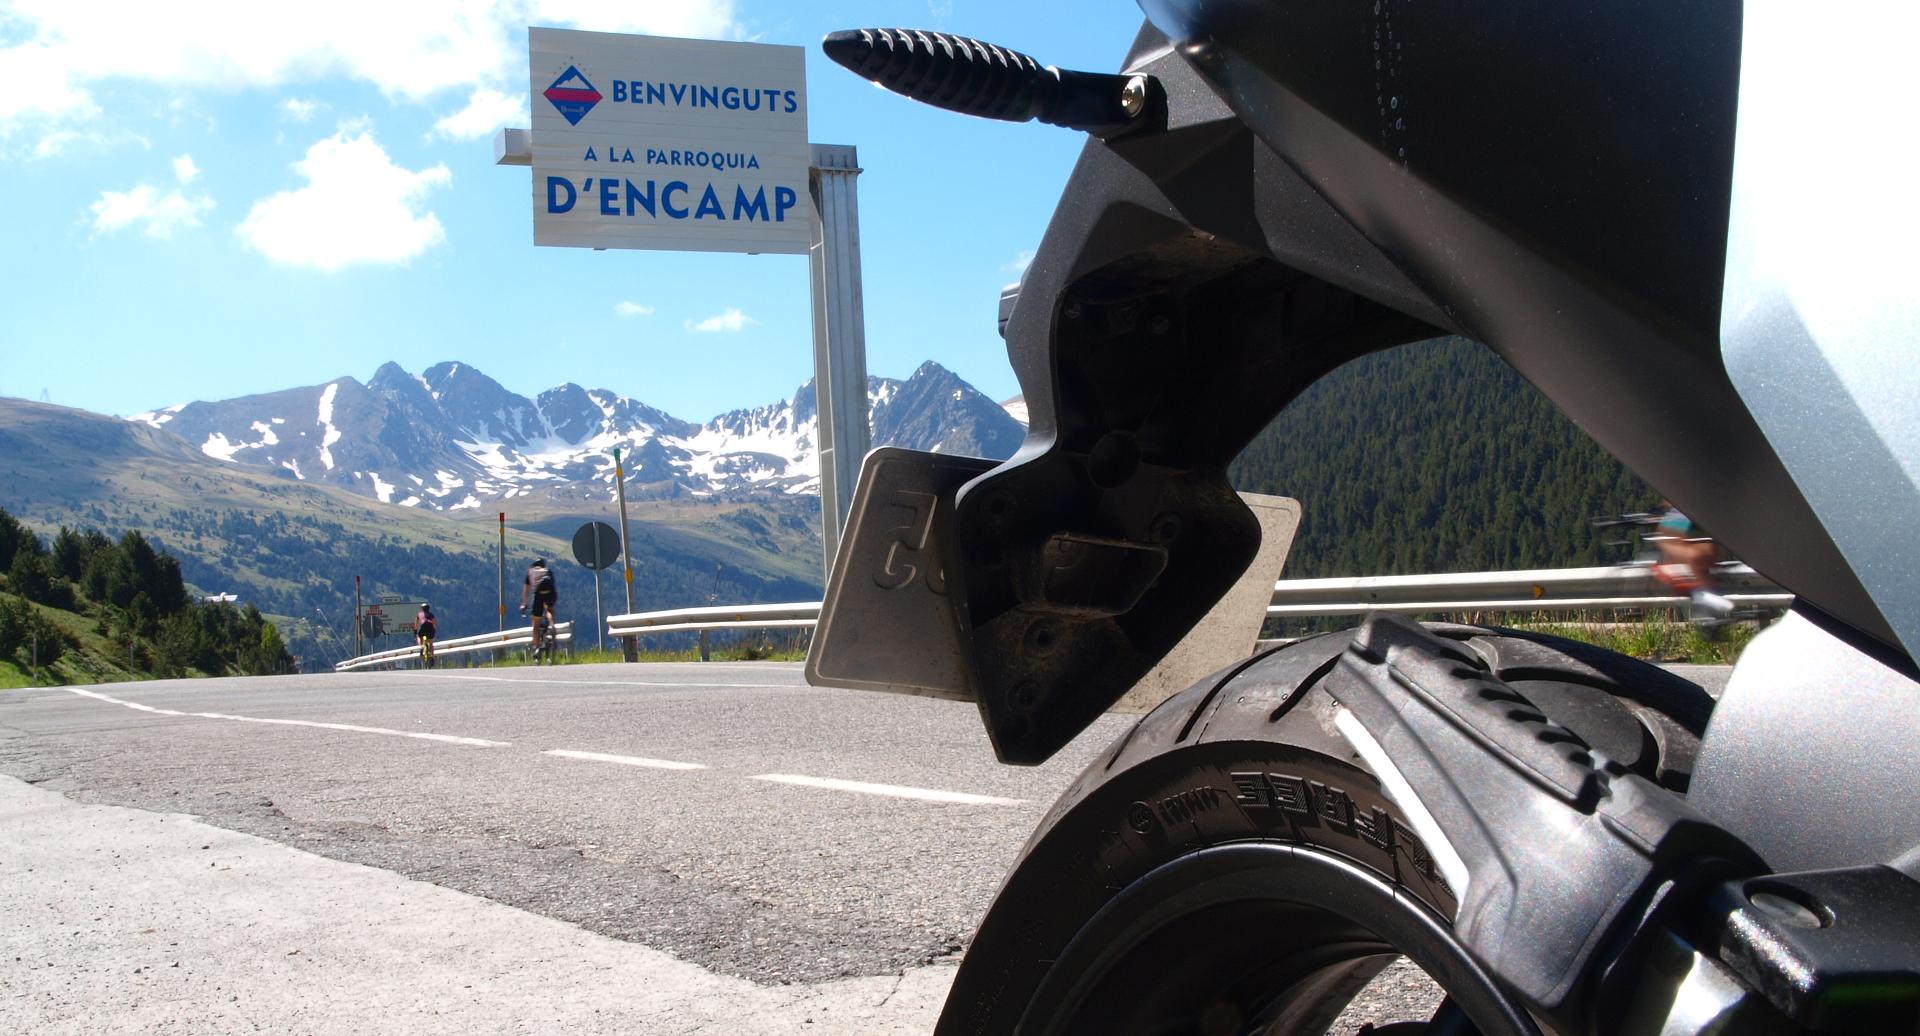 Hotel for motorcyclists in the Pyrenees